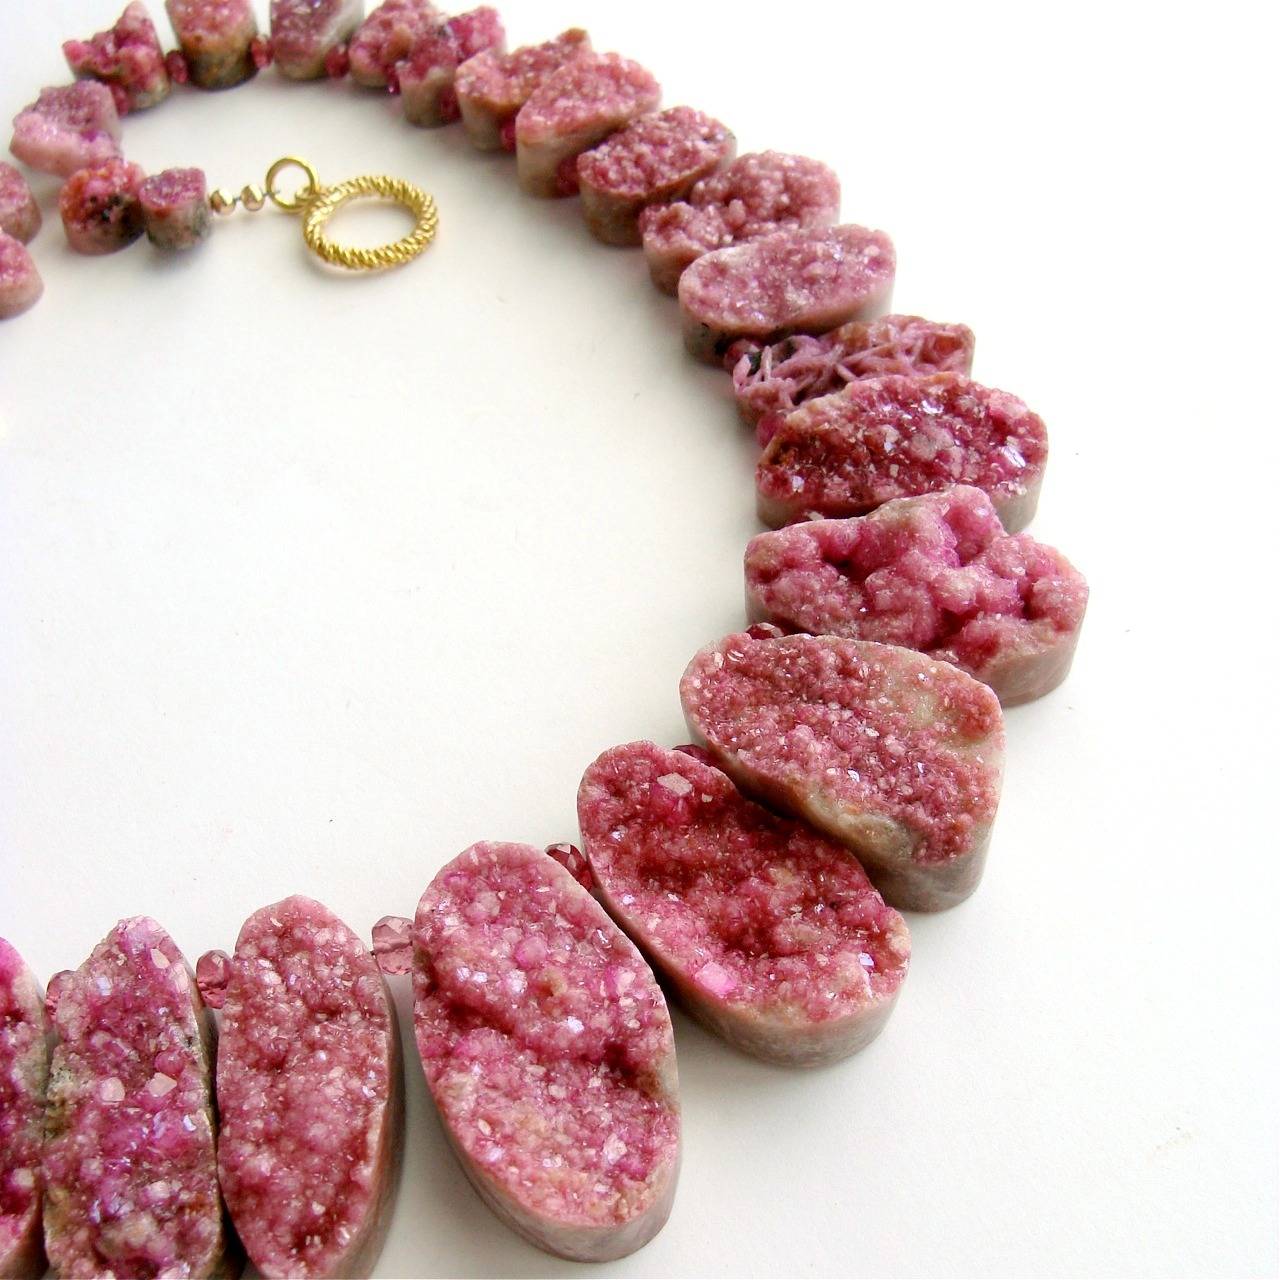 Cherie Necklace.

Dozens of amazing pink sugar-dusted cobalto calcite druzy teardrops have been suspended between faceted pink sapphires to create this spectacular specimen necklace.  The unique  teardrops graduate in size from 10.6mm to 34.8mm